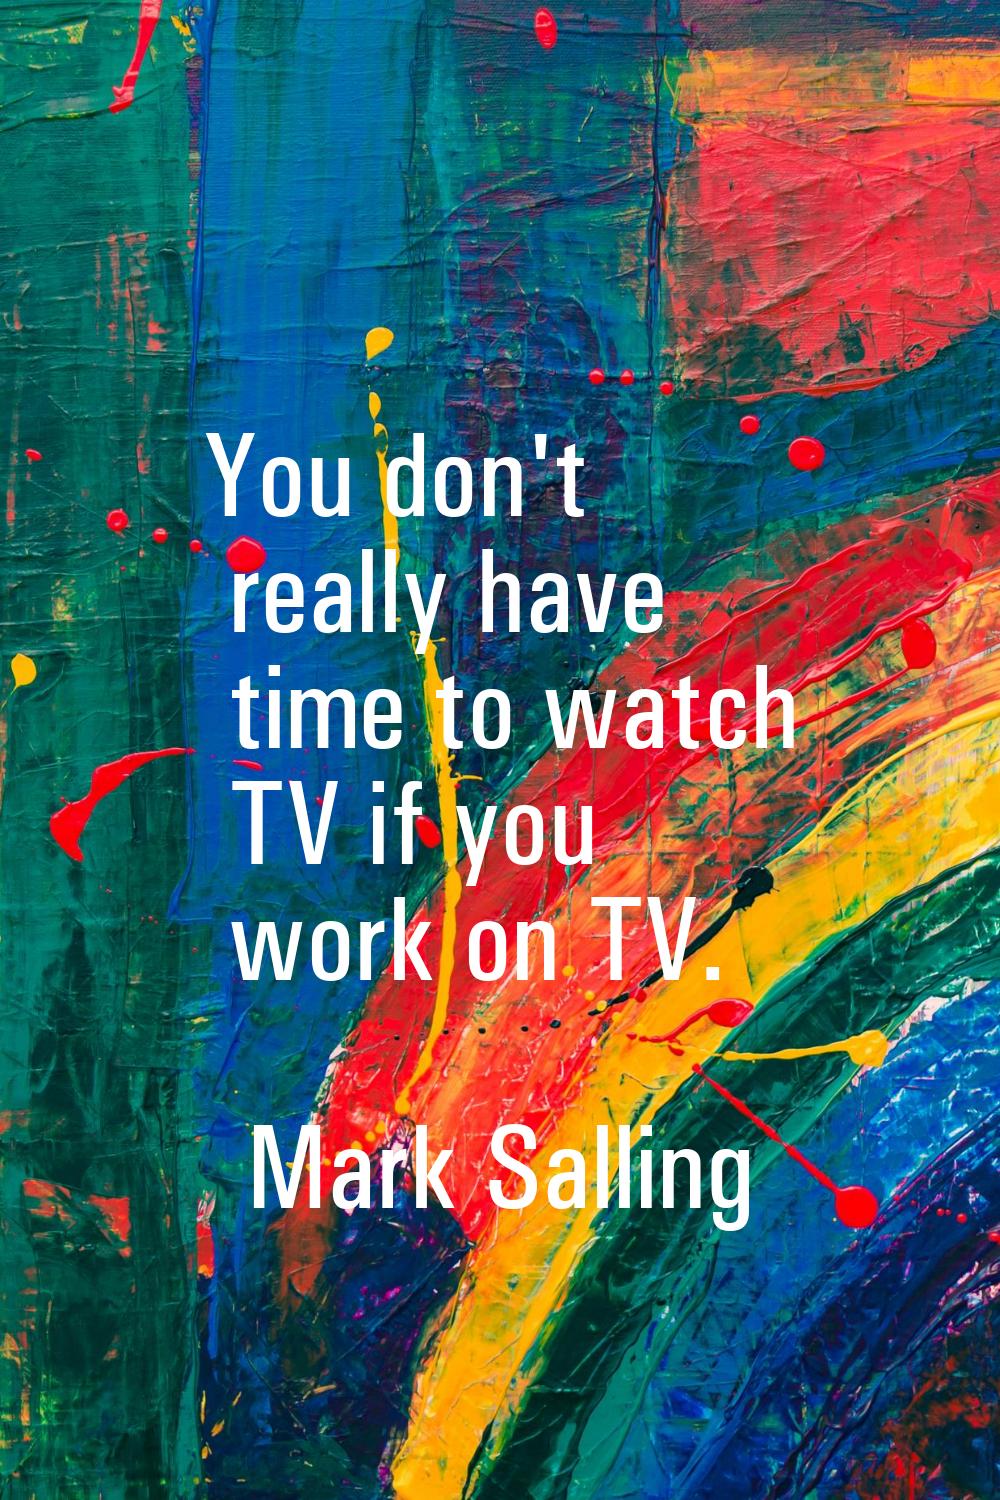 You don't really have time to watch TV if you work on TV.